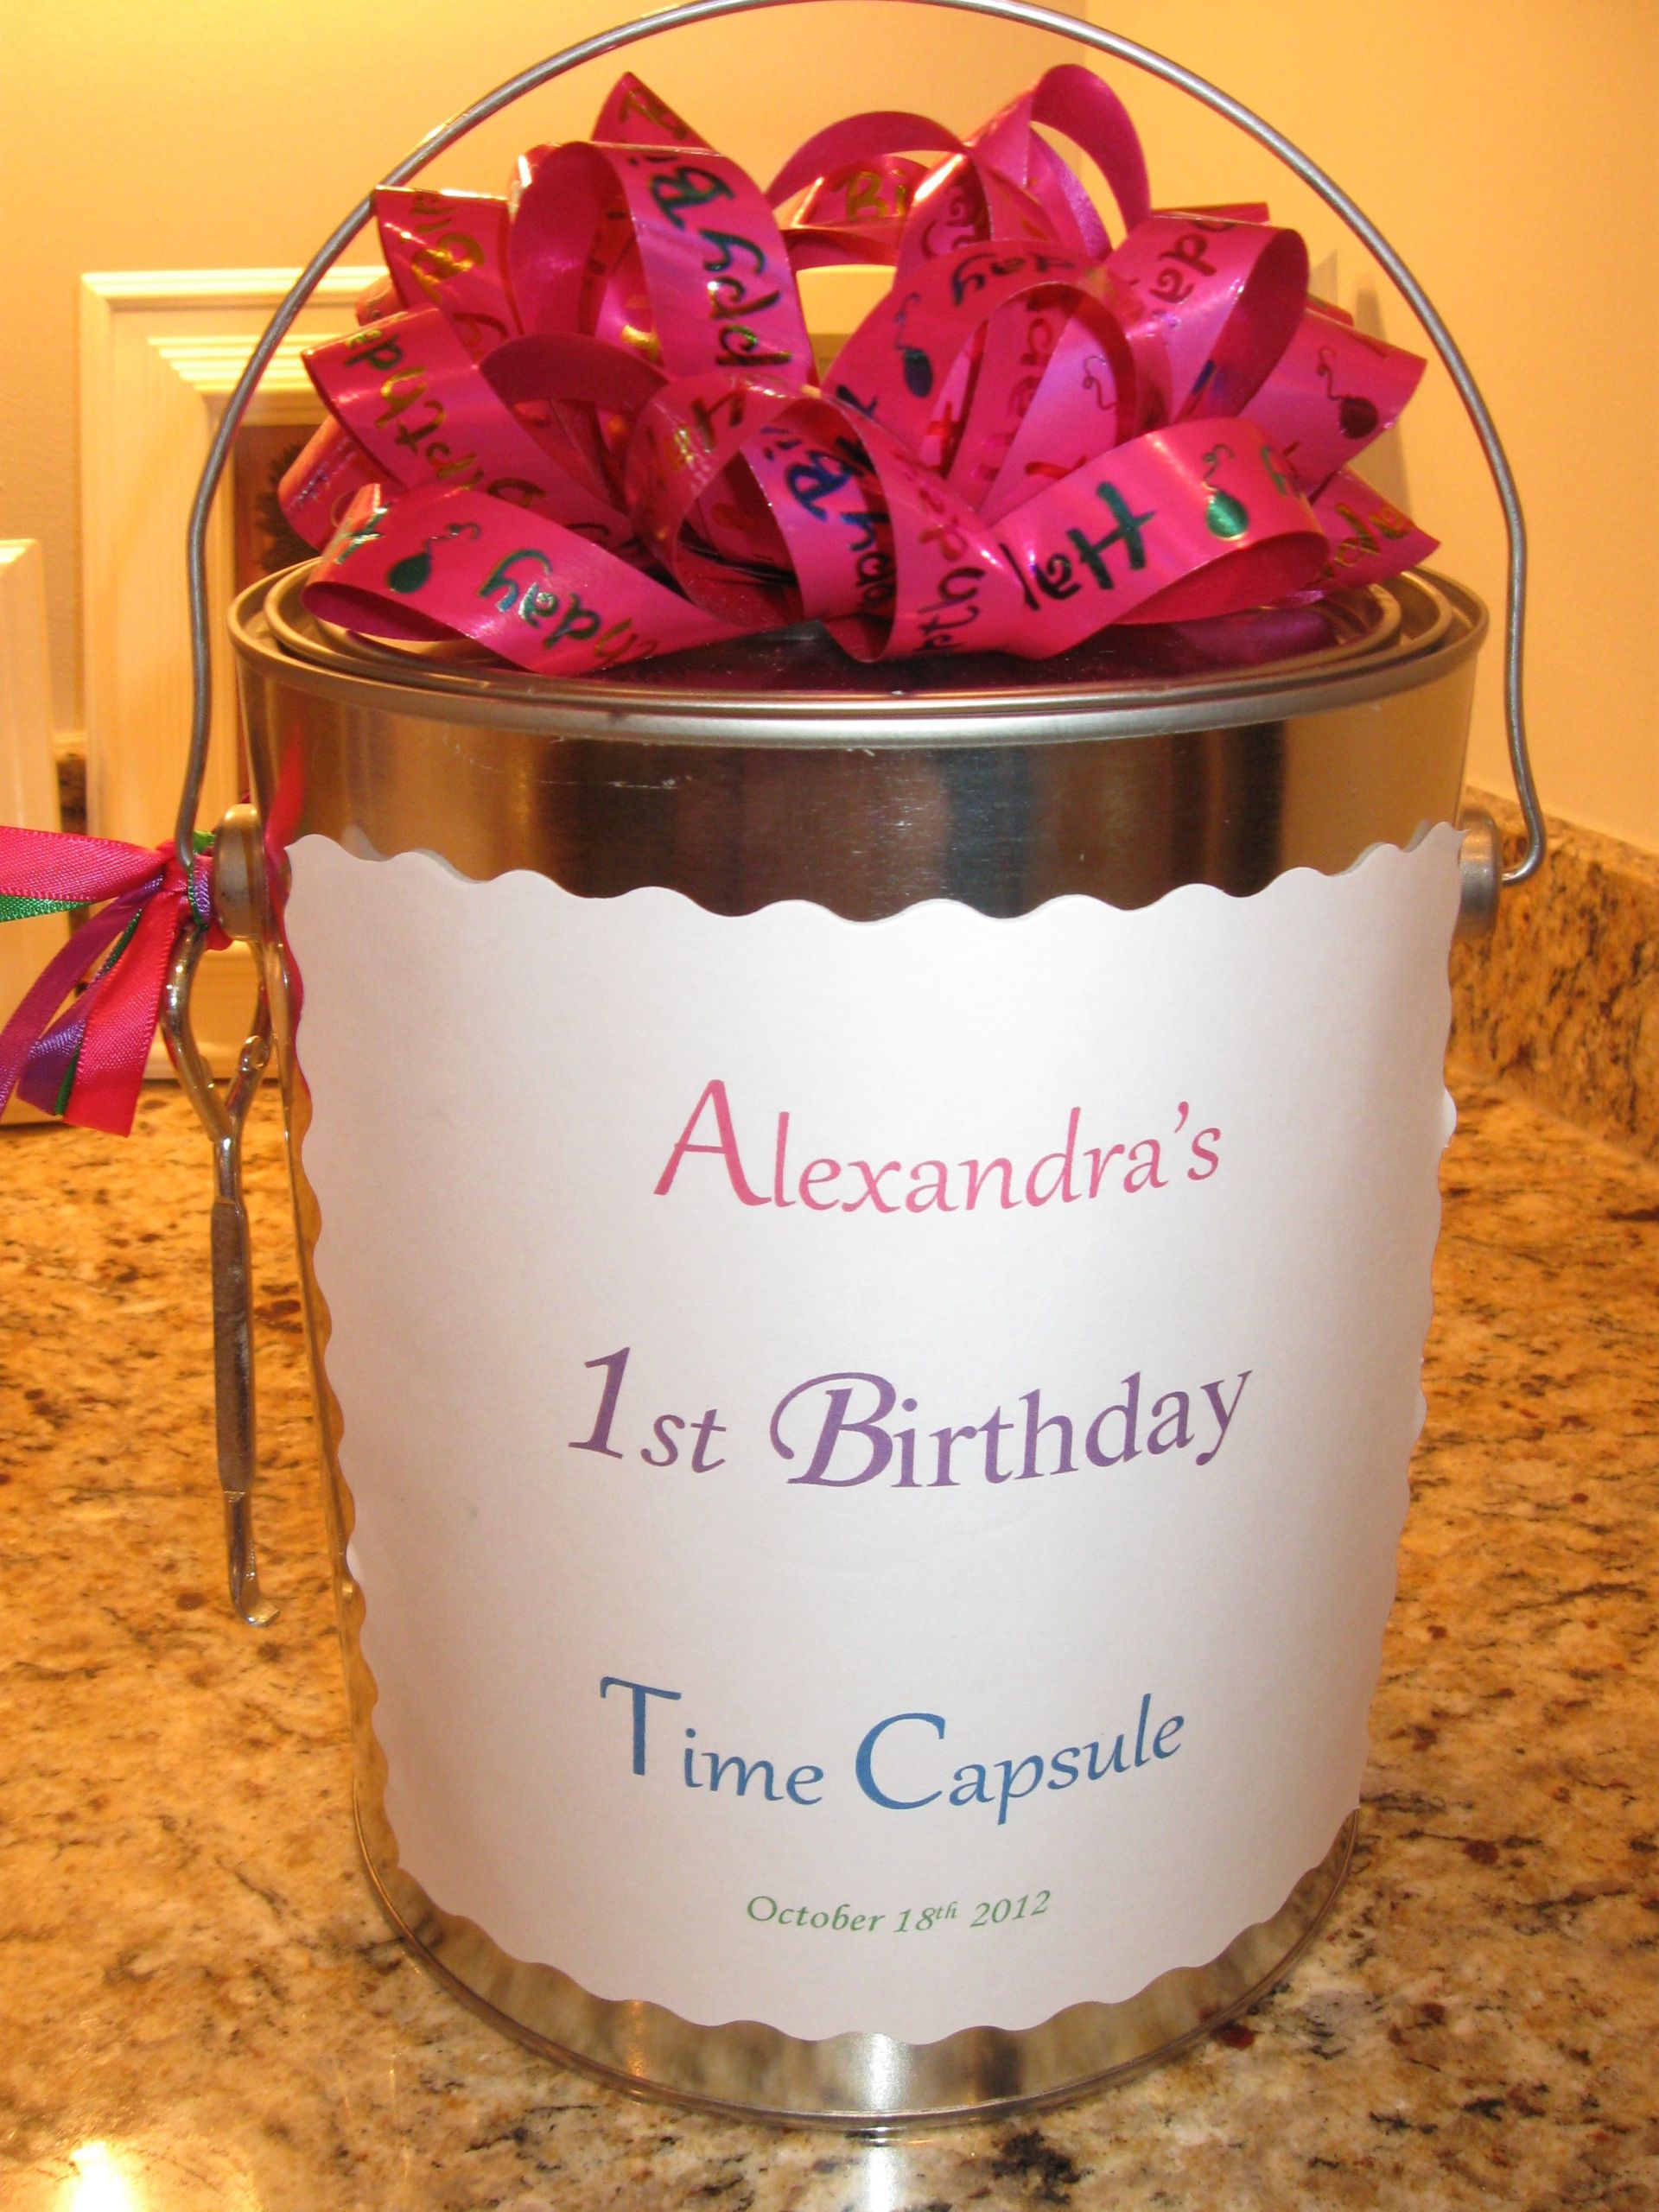 Baby'S First Birthday Gift Ideas For Her
 Open this time capsule on her 18th birthday full of